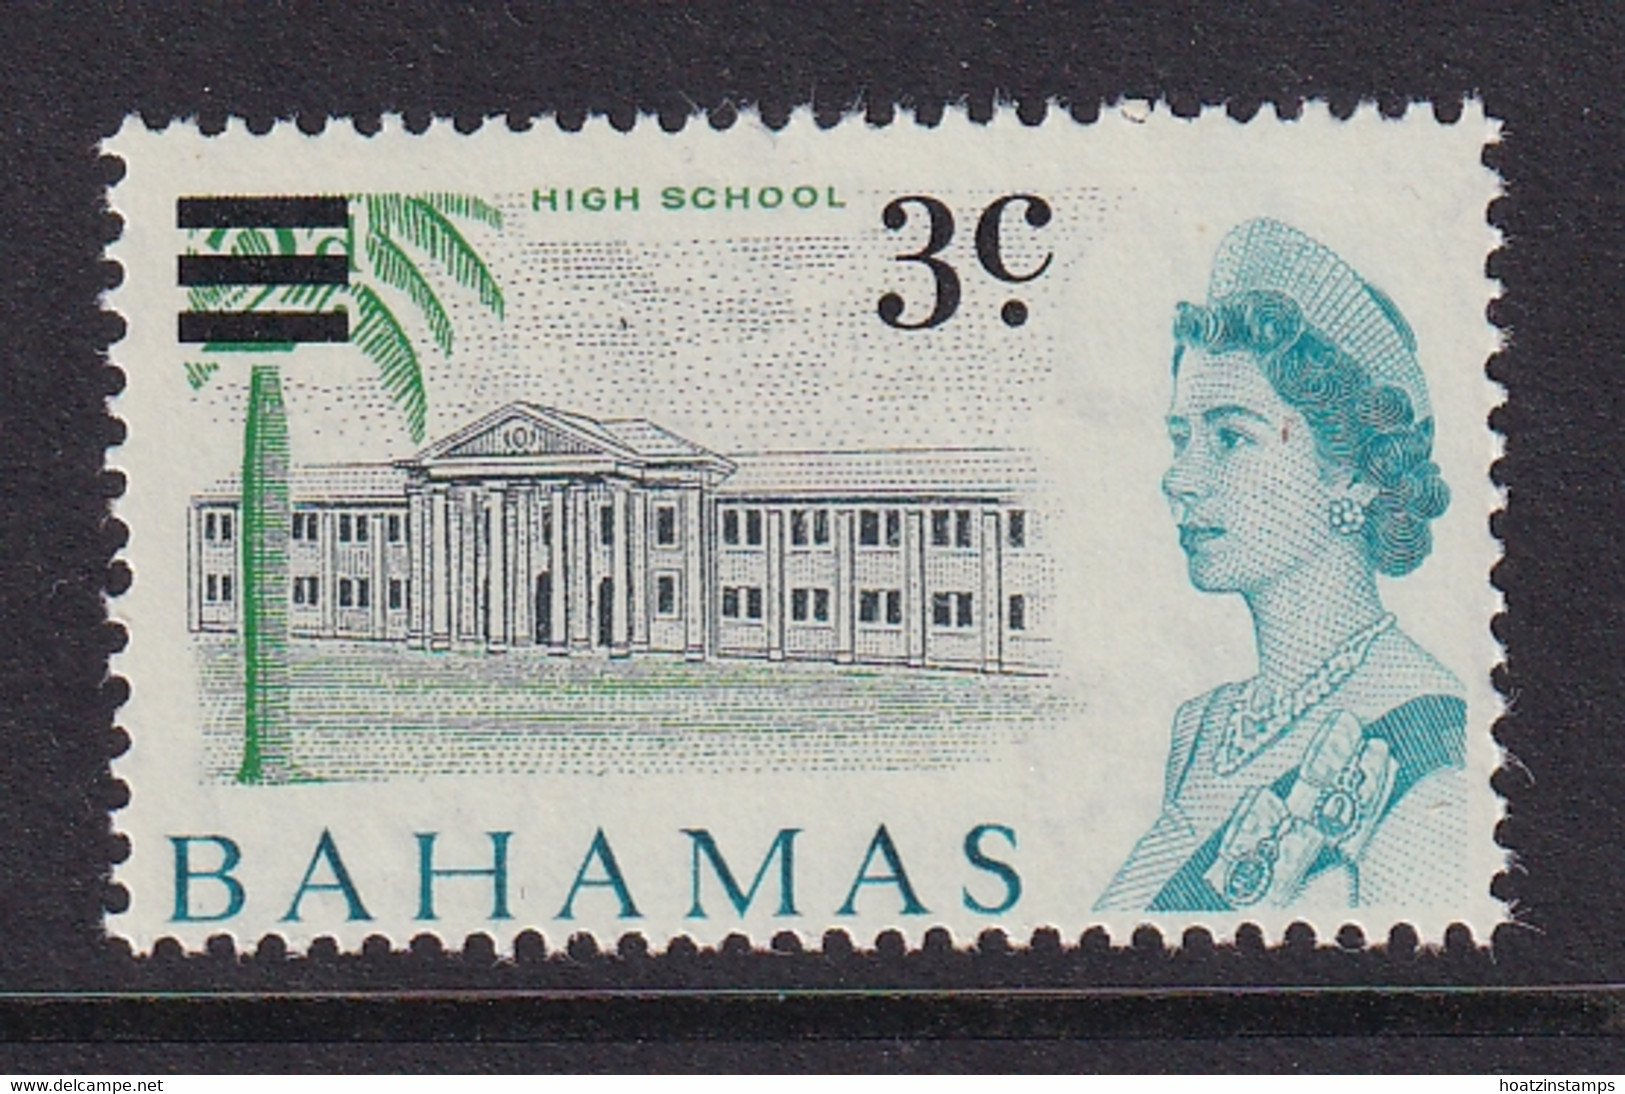 Bahamas: 1966   QE II - Decimal Currency - Surcharge   SG275    3c On 2d    MNH - 1963-1973 Ministerial Government